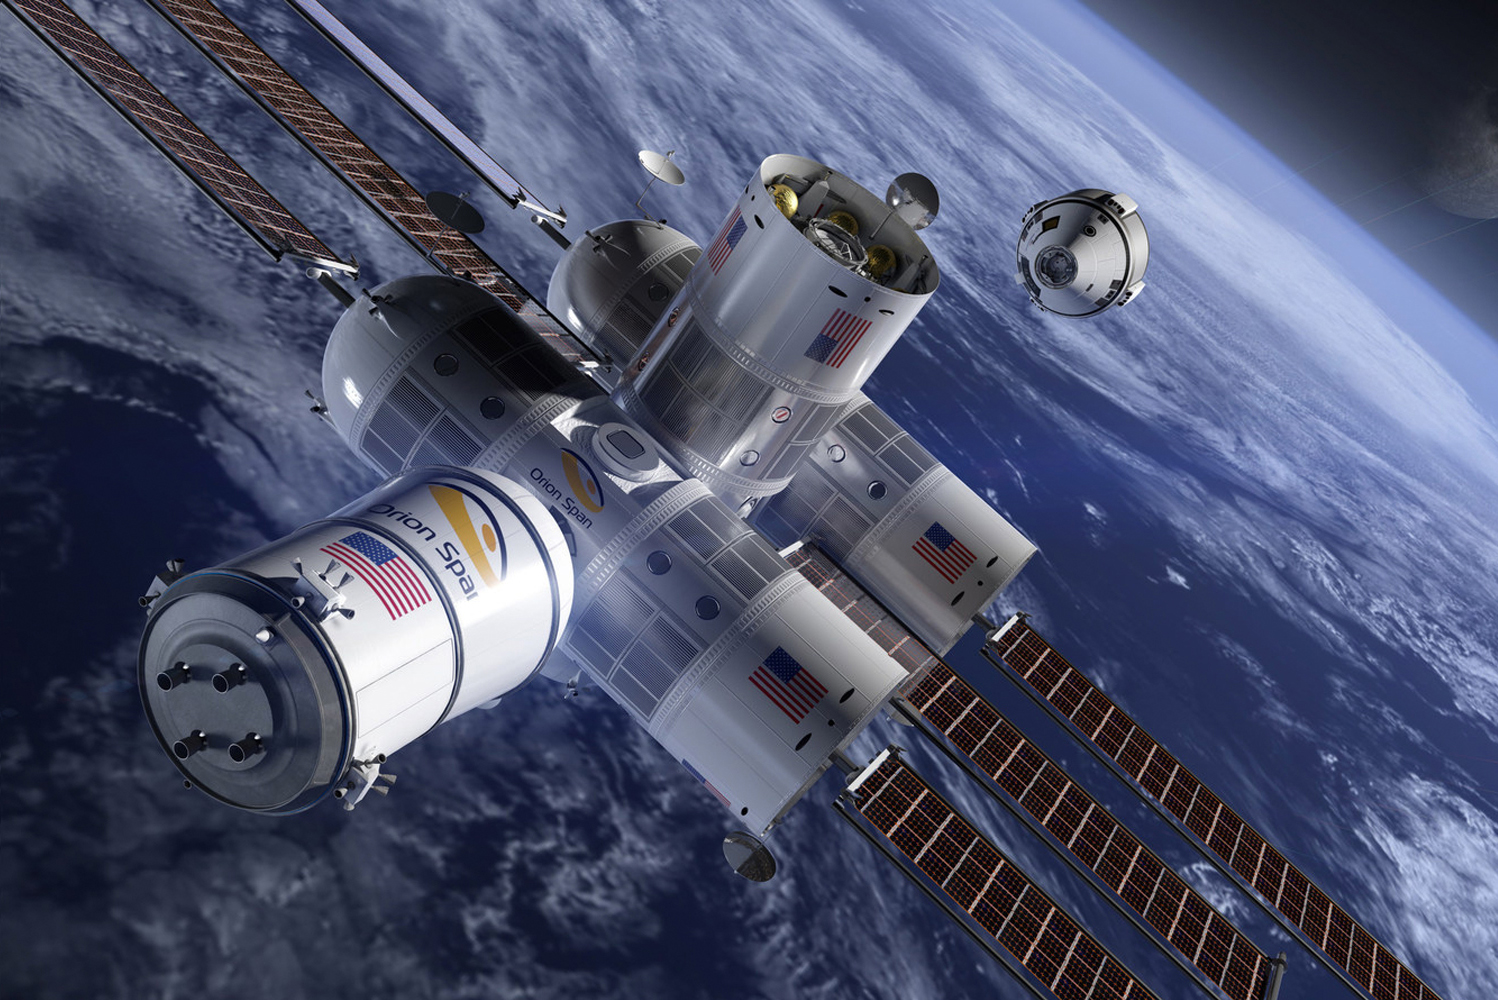 Aurora Station scheduled to open as first-ever space hotel in 2021